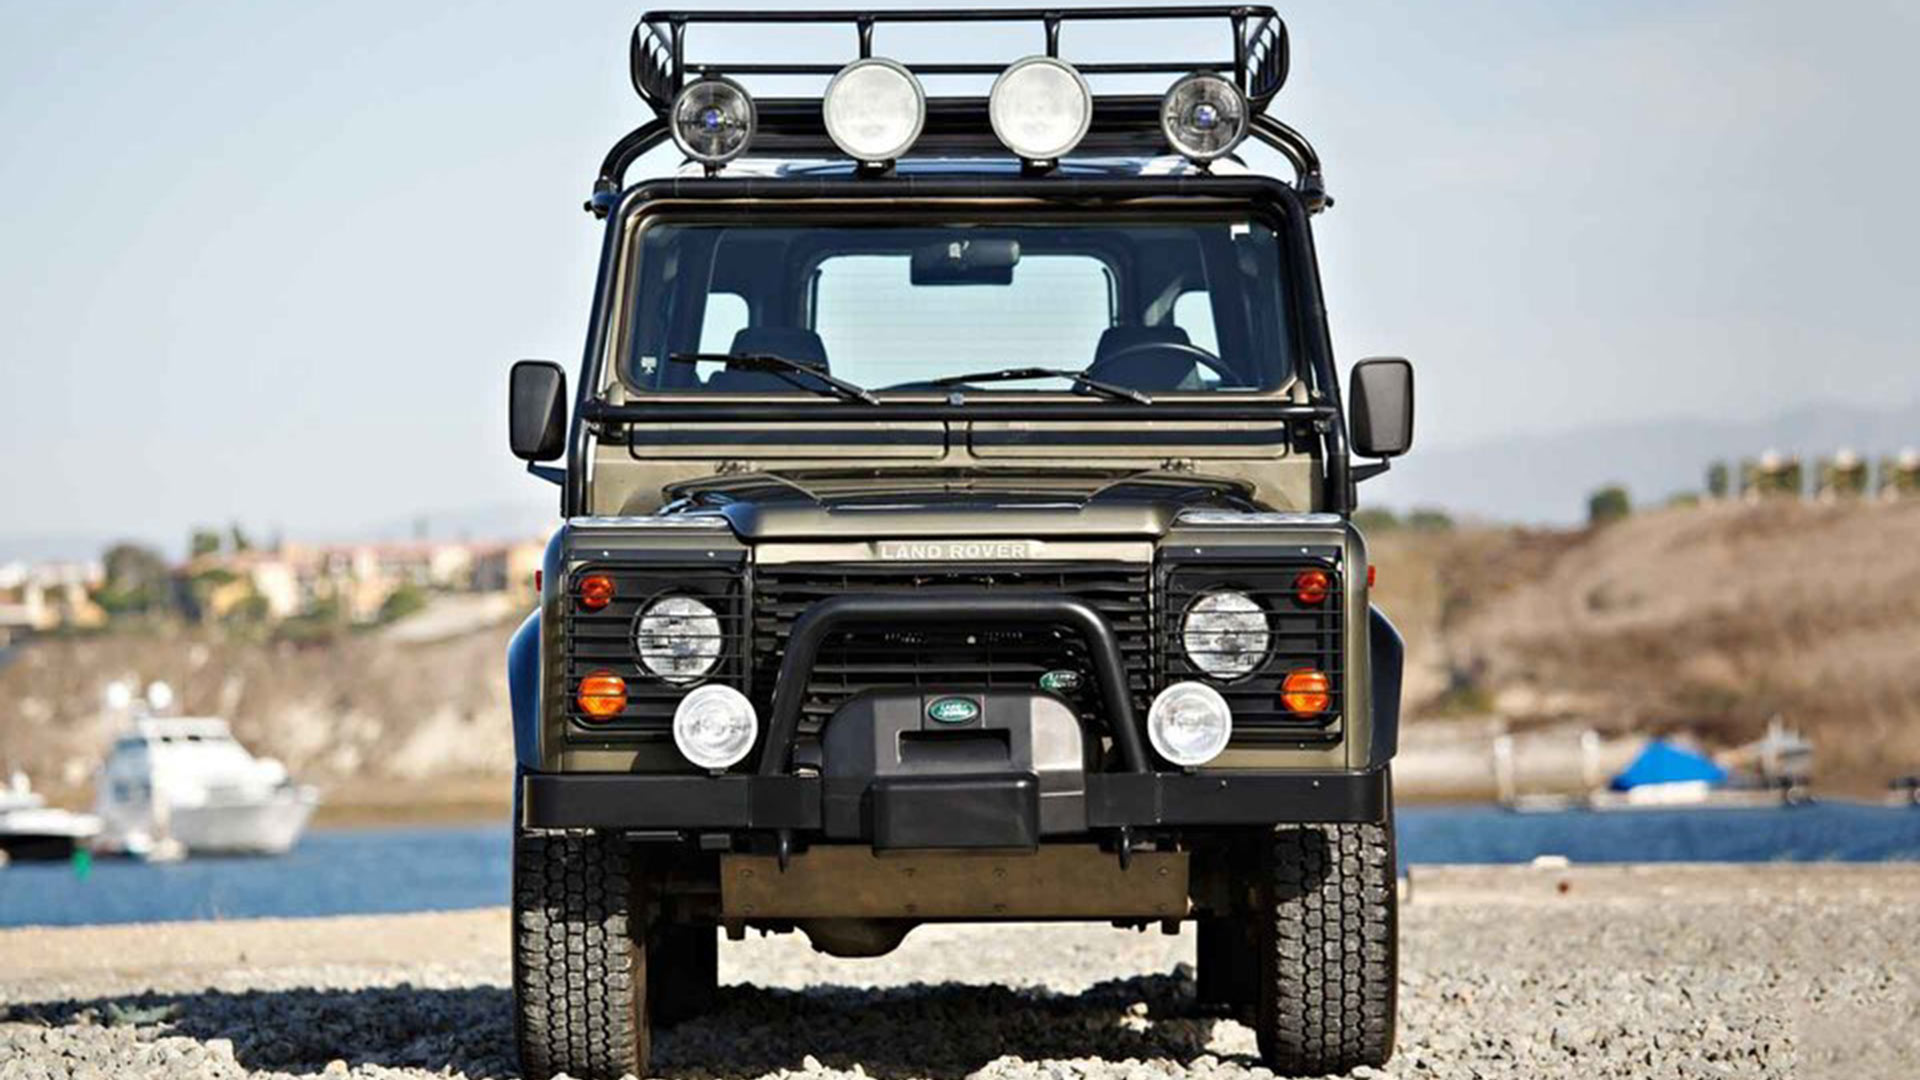 Last NAS Land Rover Defender 90 auction